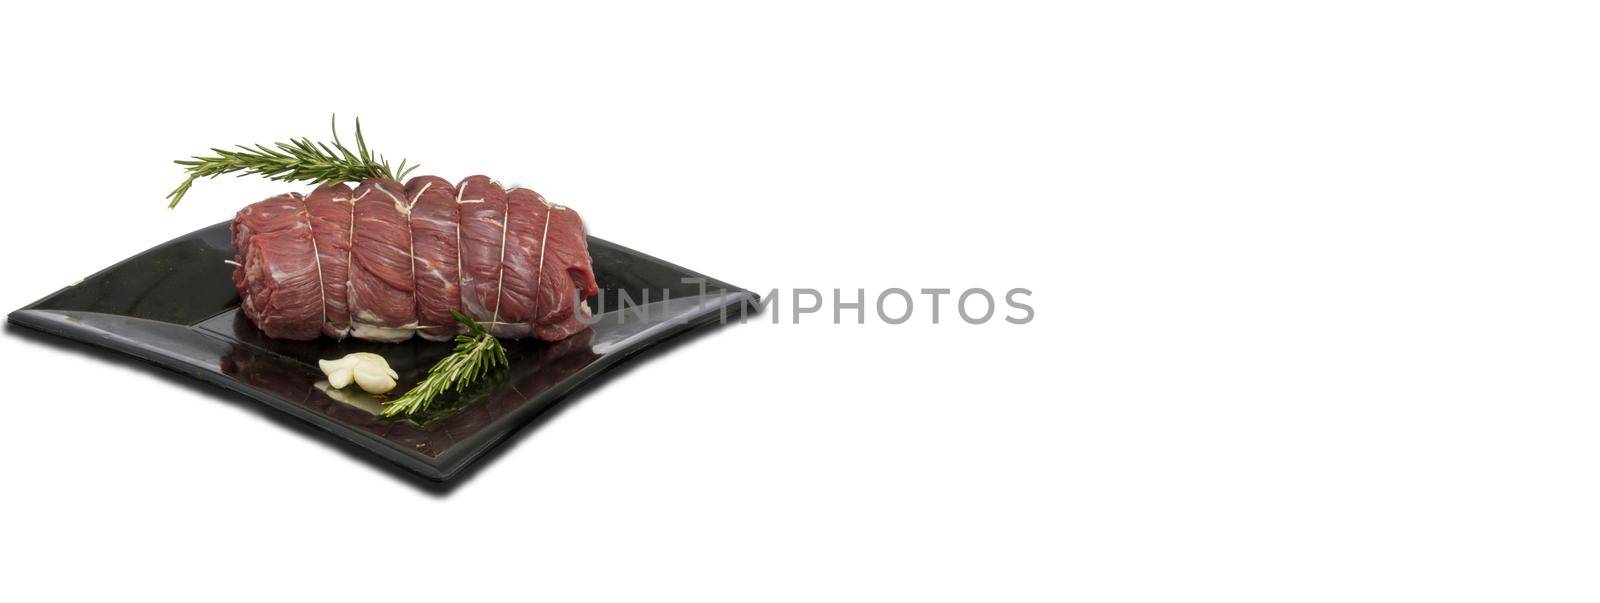 Raw meat dish white background, banner image with copy space